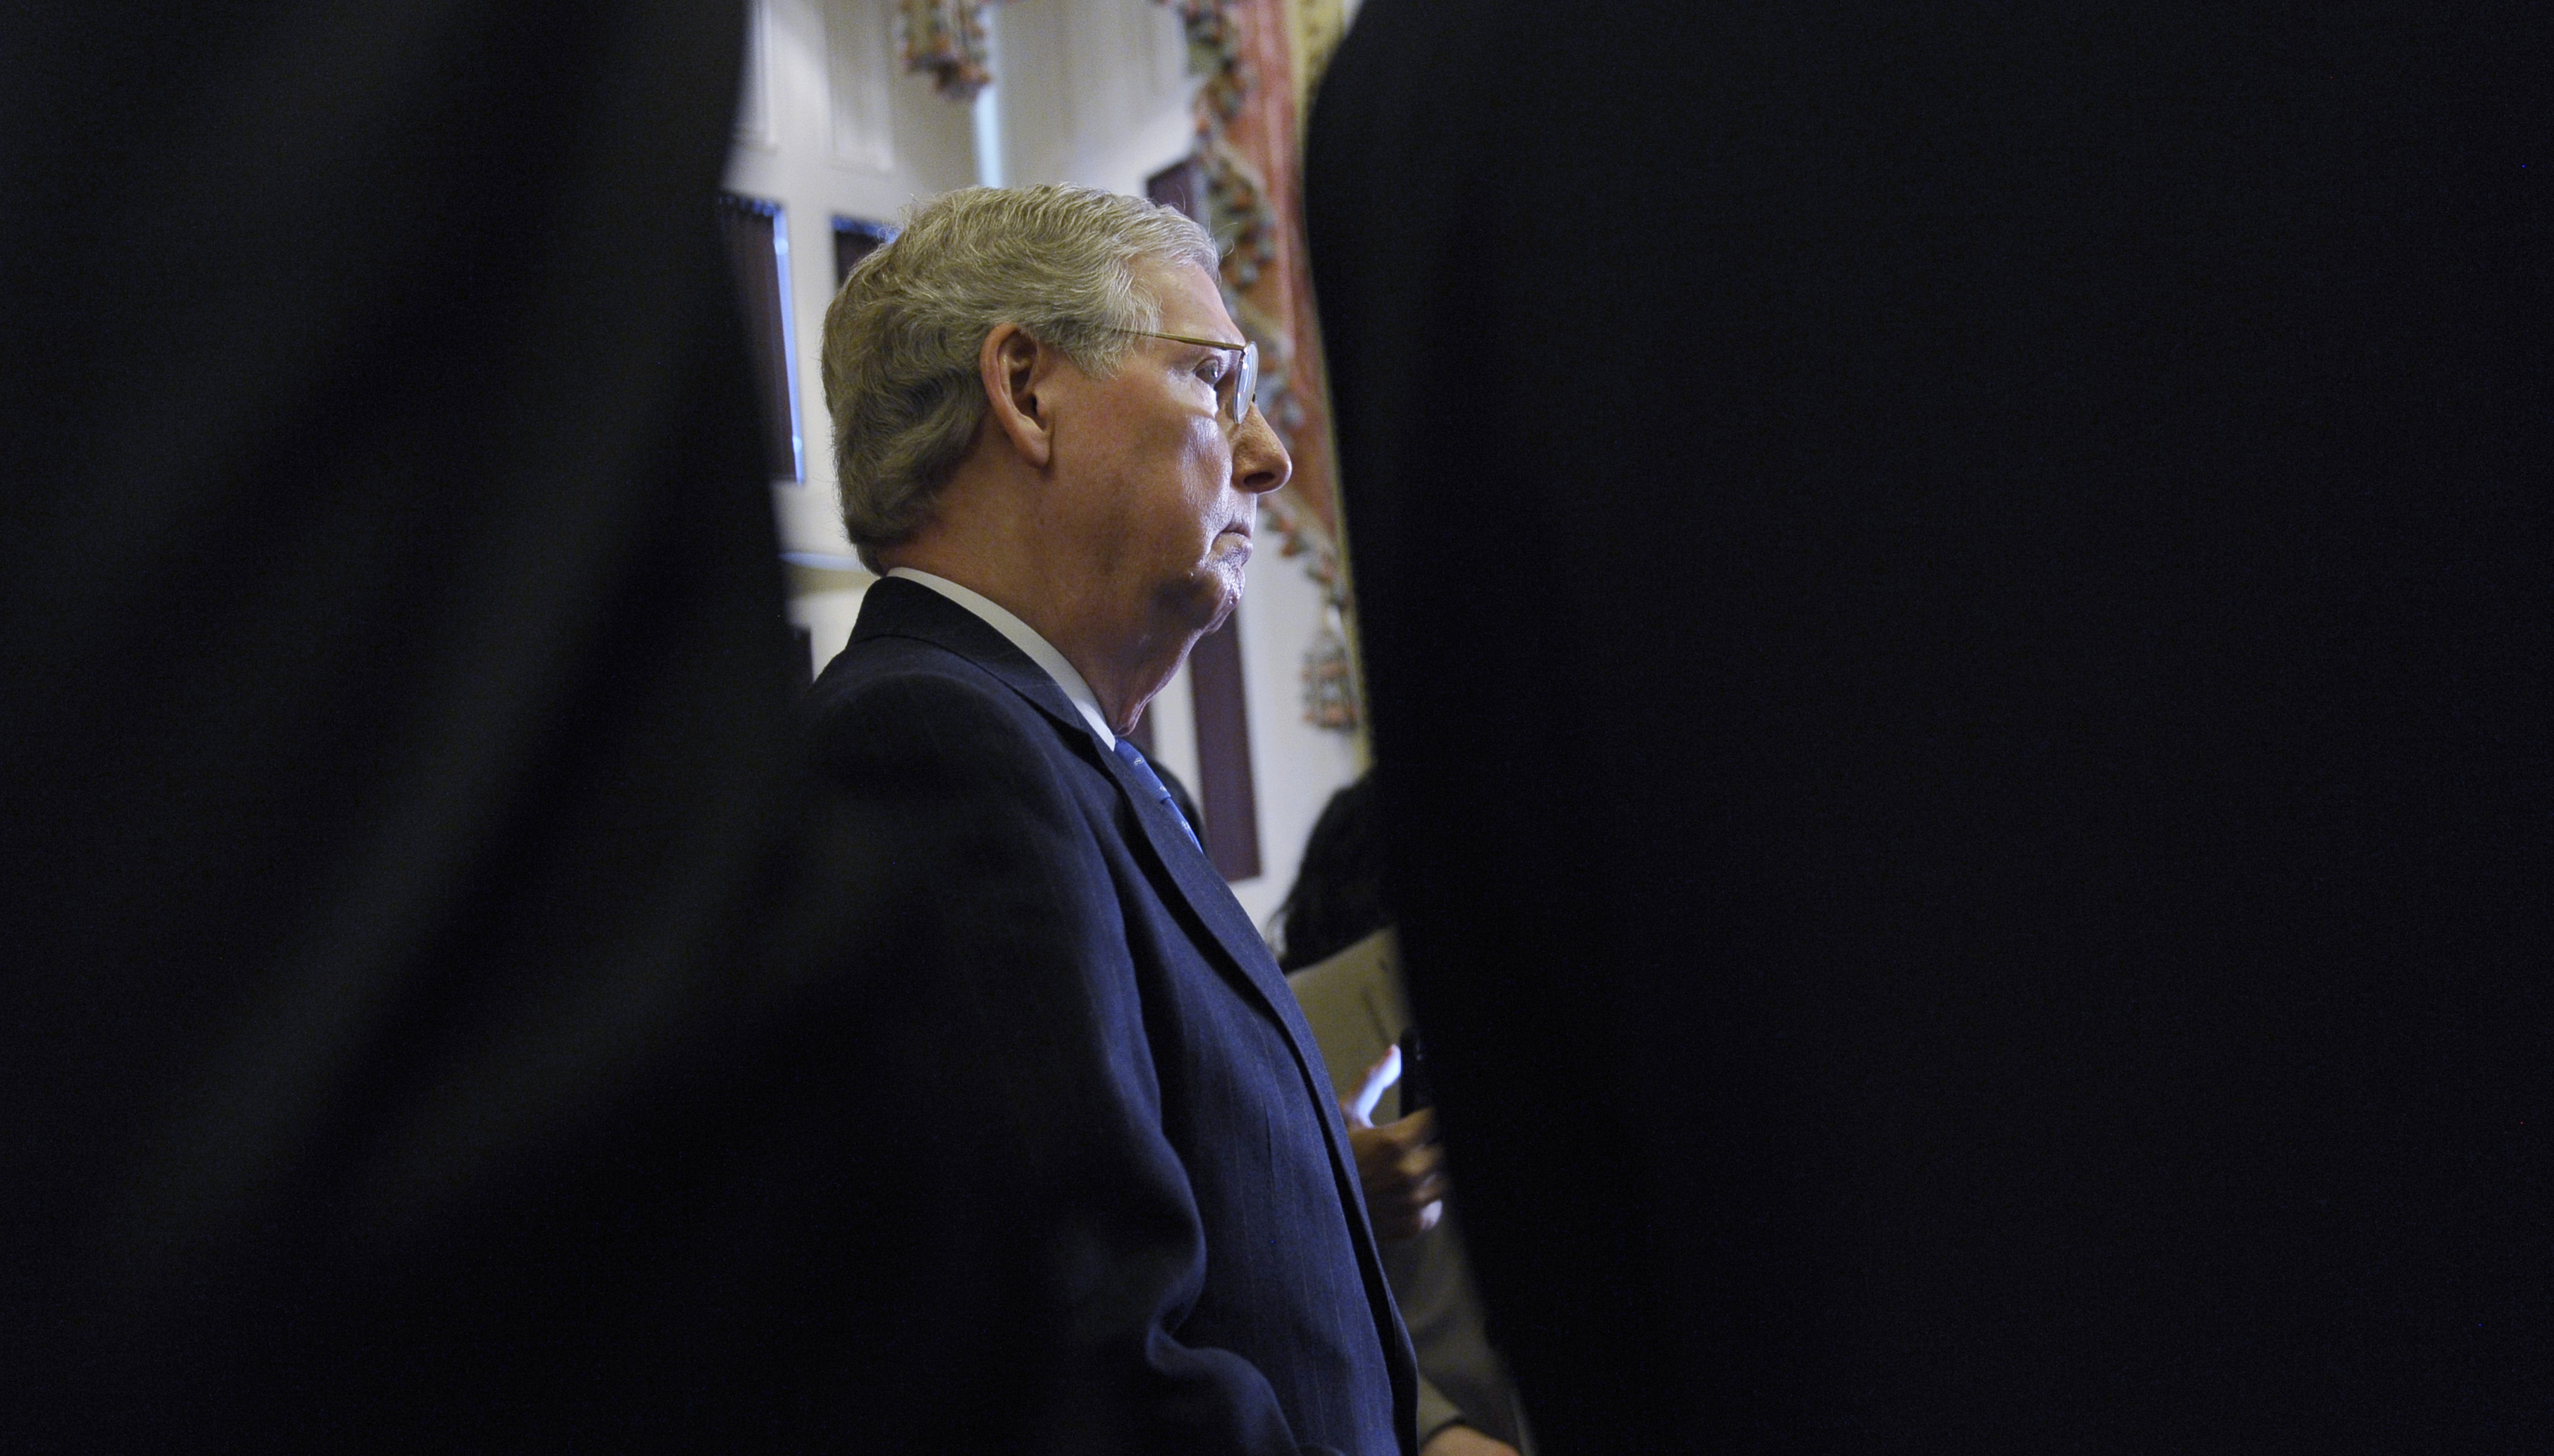 Senate Minority Leader Mitch McConnell of Ky. listens during a news conference on Capitol Hill in Washington, Tuesday, March 25, 2014, following a Republican policy luncheon with Senate Republicans . (AP Photo/Susan Walsh)